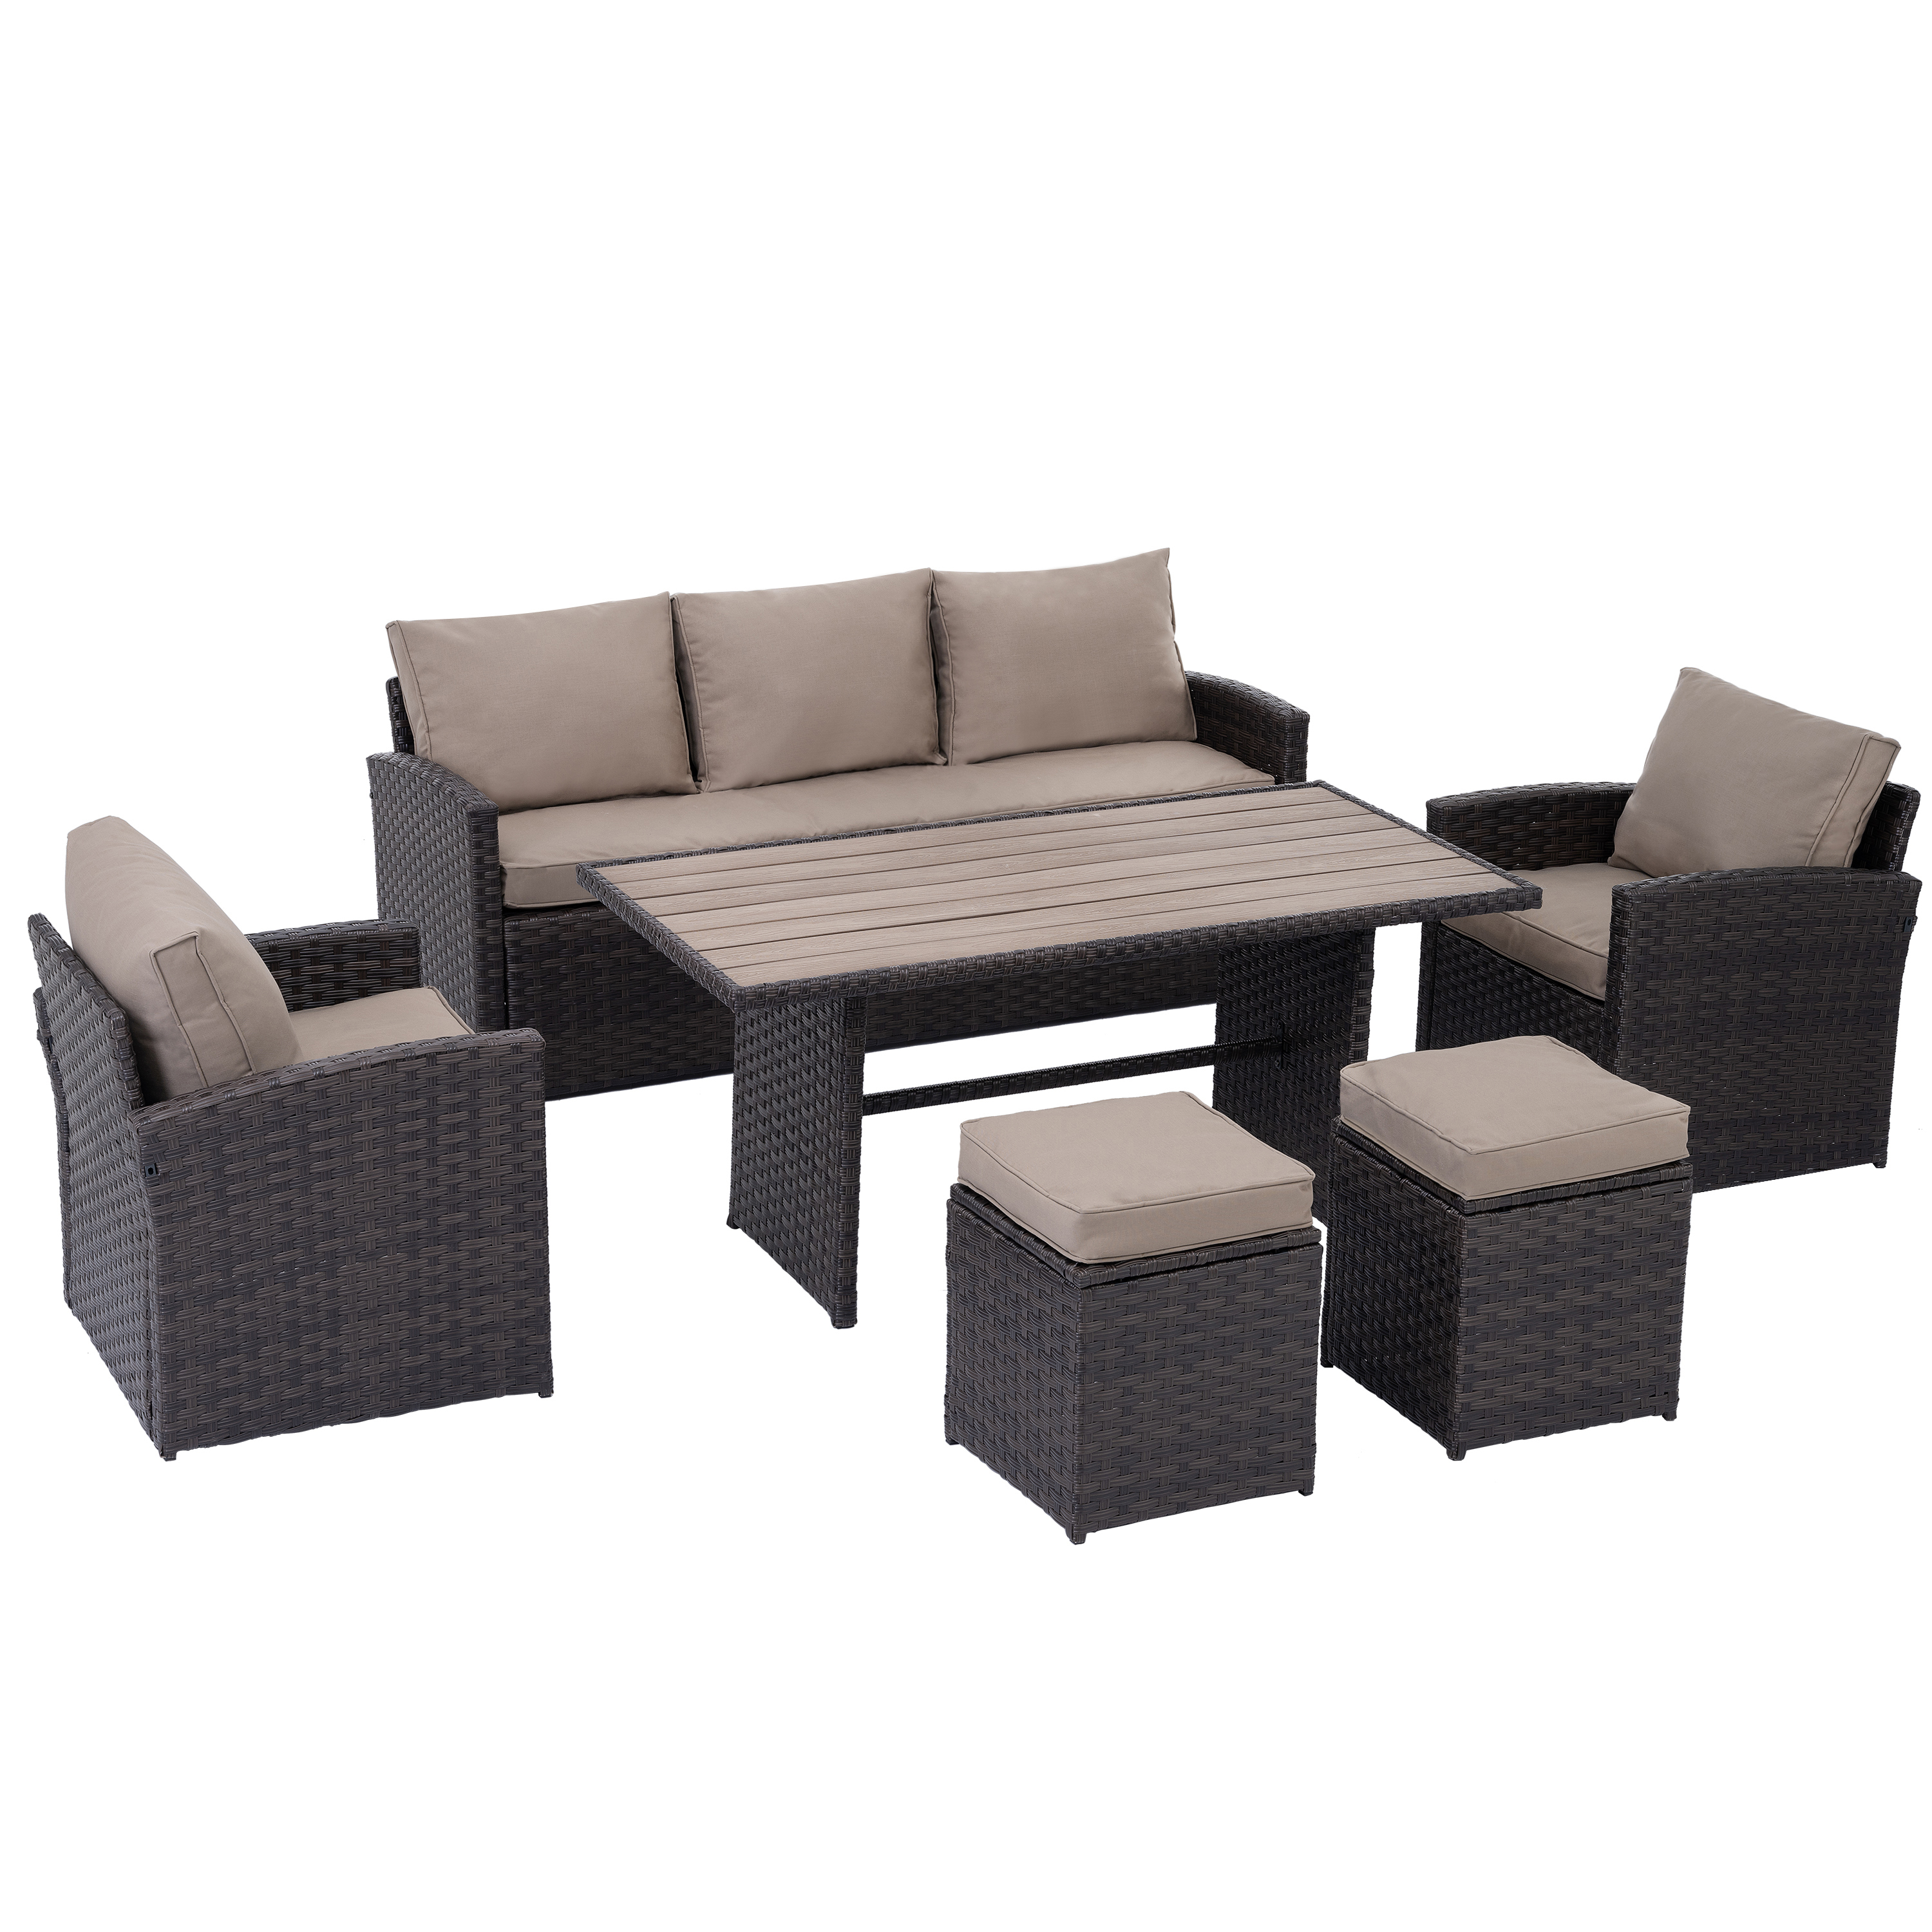 Outdoor Conversation Sofa Set, 6 Piece Patio Sectional Dining Table Chair with Ottomans & Cushions, PE Rattan Wicker Cushioned Couch Set for Pool Lawn Patio Backyard, Sectional Furniture Set - image 5 of 9